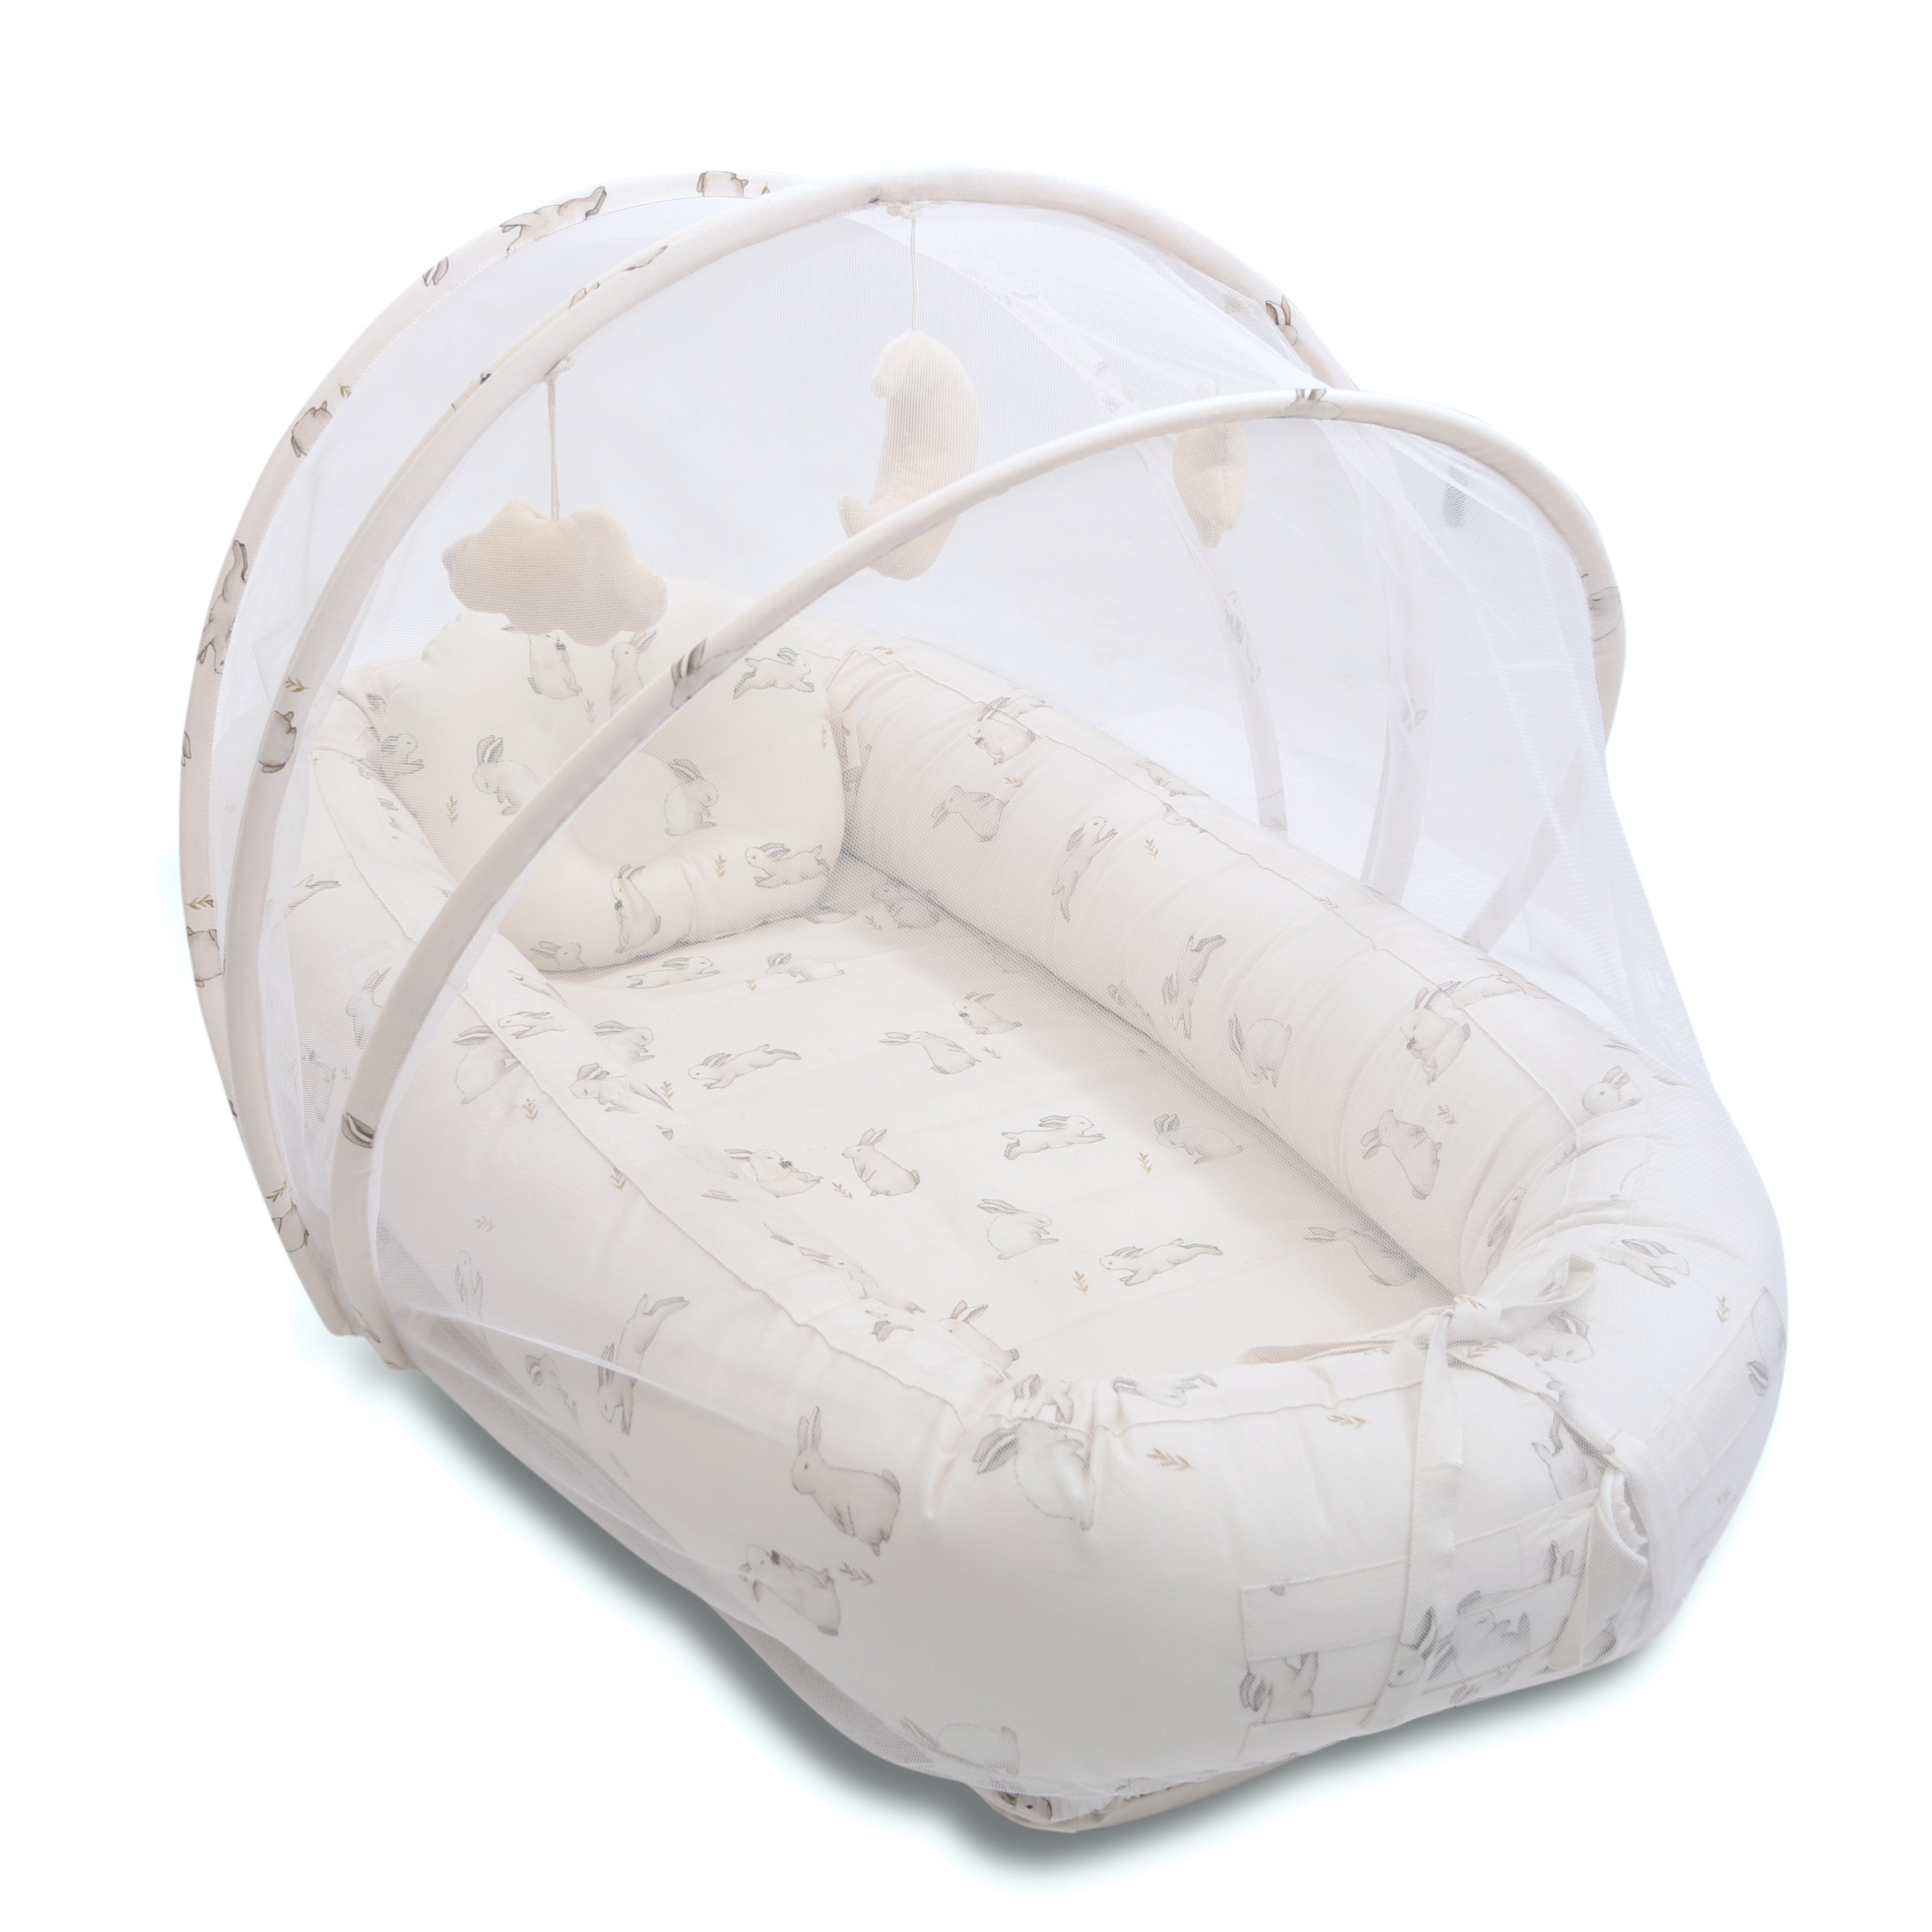 Enchanted Bunny Baby Nest Set - Lil Mulberry